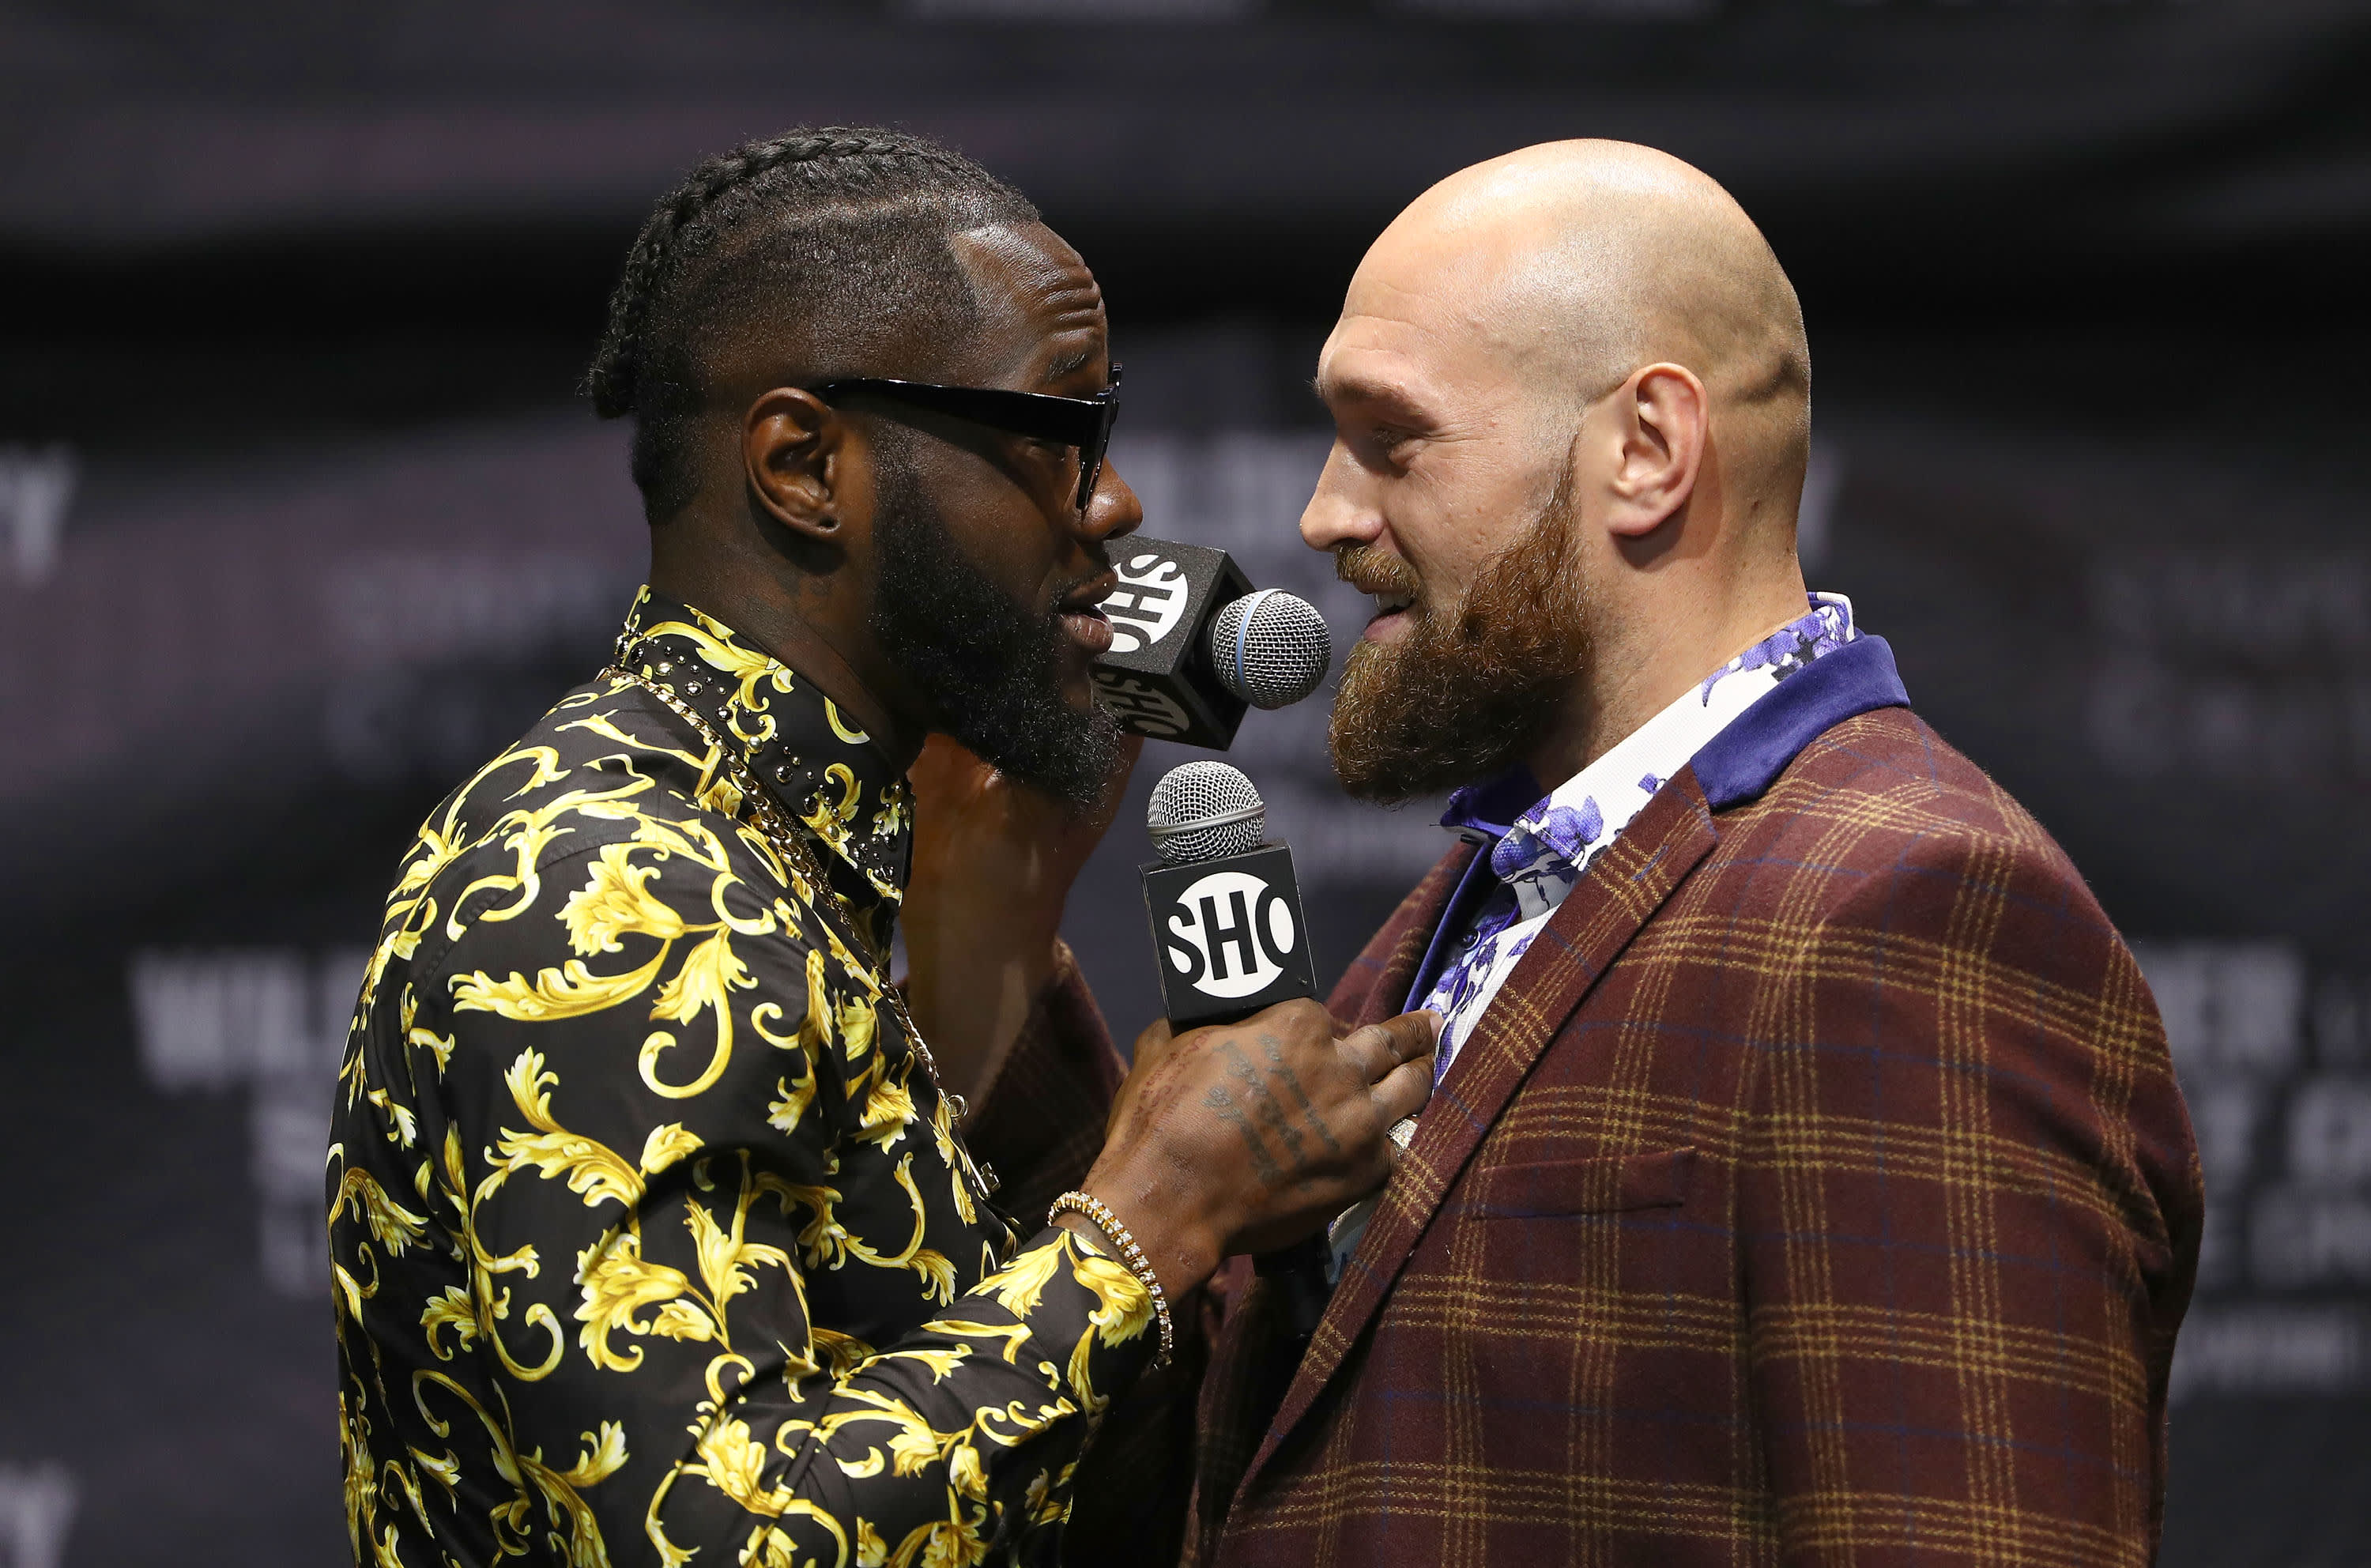 Deontay Wilder rematch against Tyson Fury could top $100 million